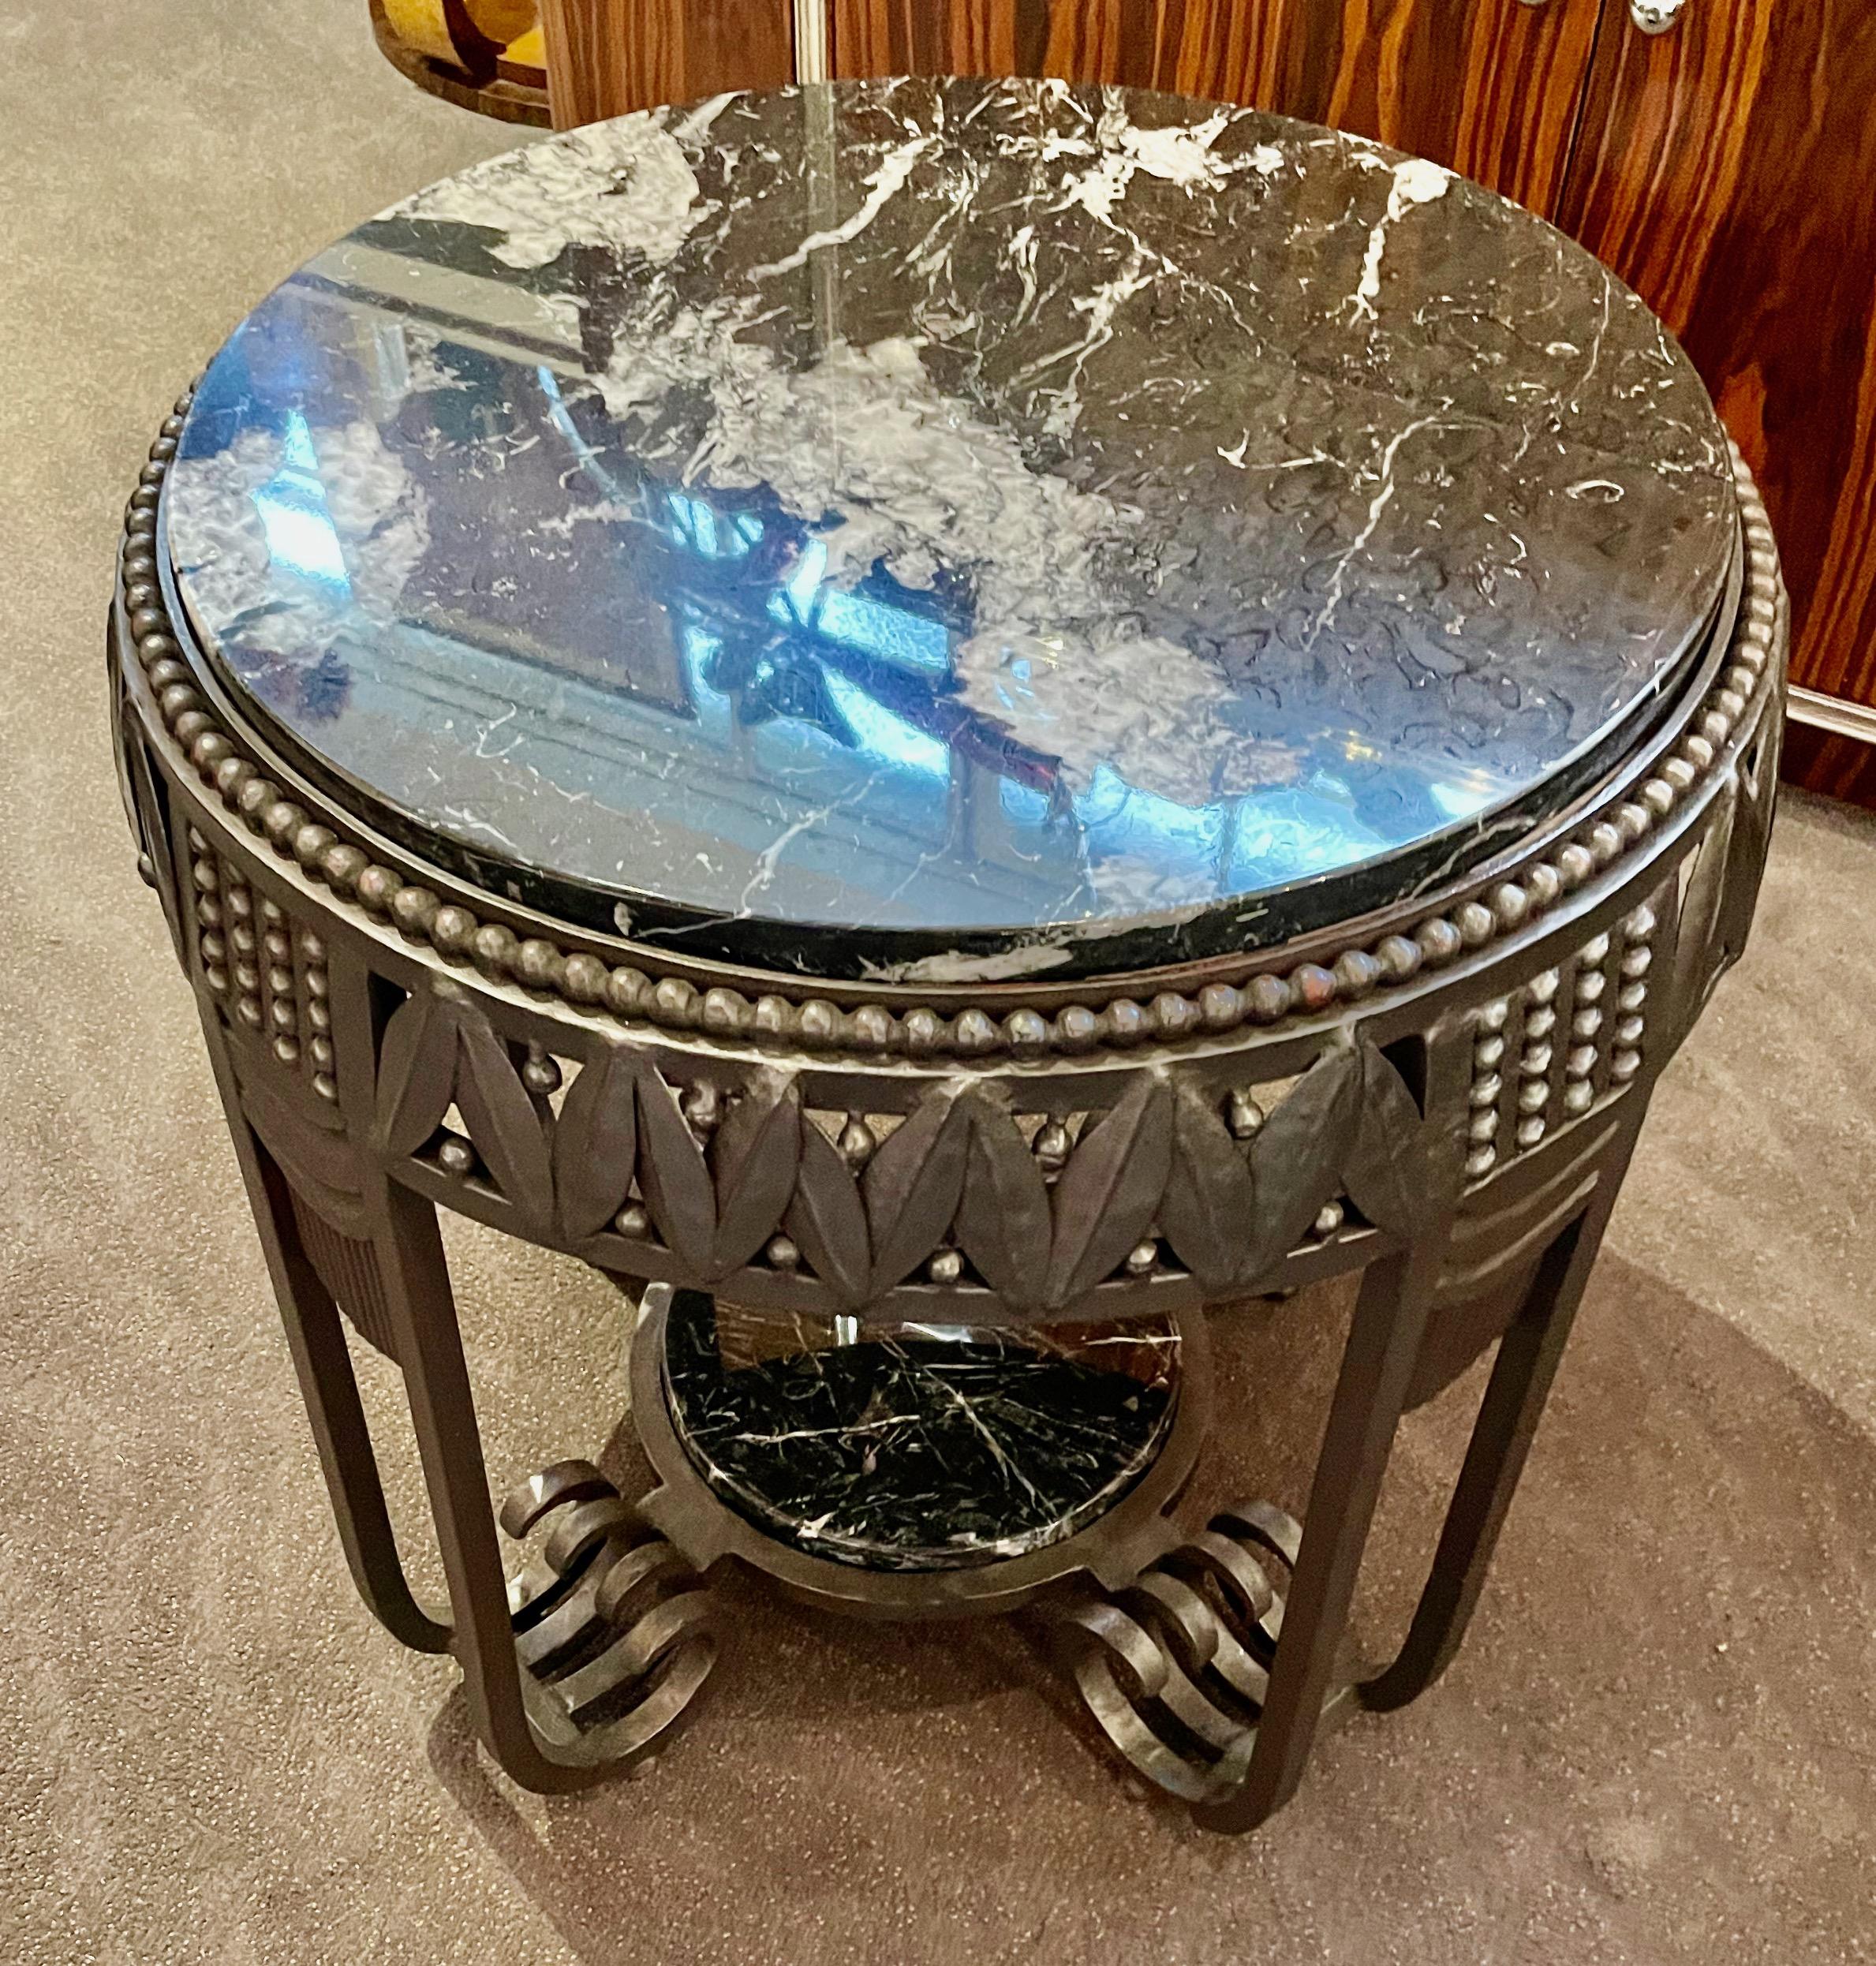 Art Deco iron table, custom made exclusively for Art Deco Collection in the original Fer Forge French tradition with a top made of richly veined black & white marble. The ironwork is a faithful rendition of the style made popular by the great French